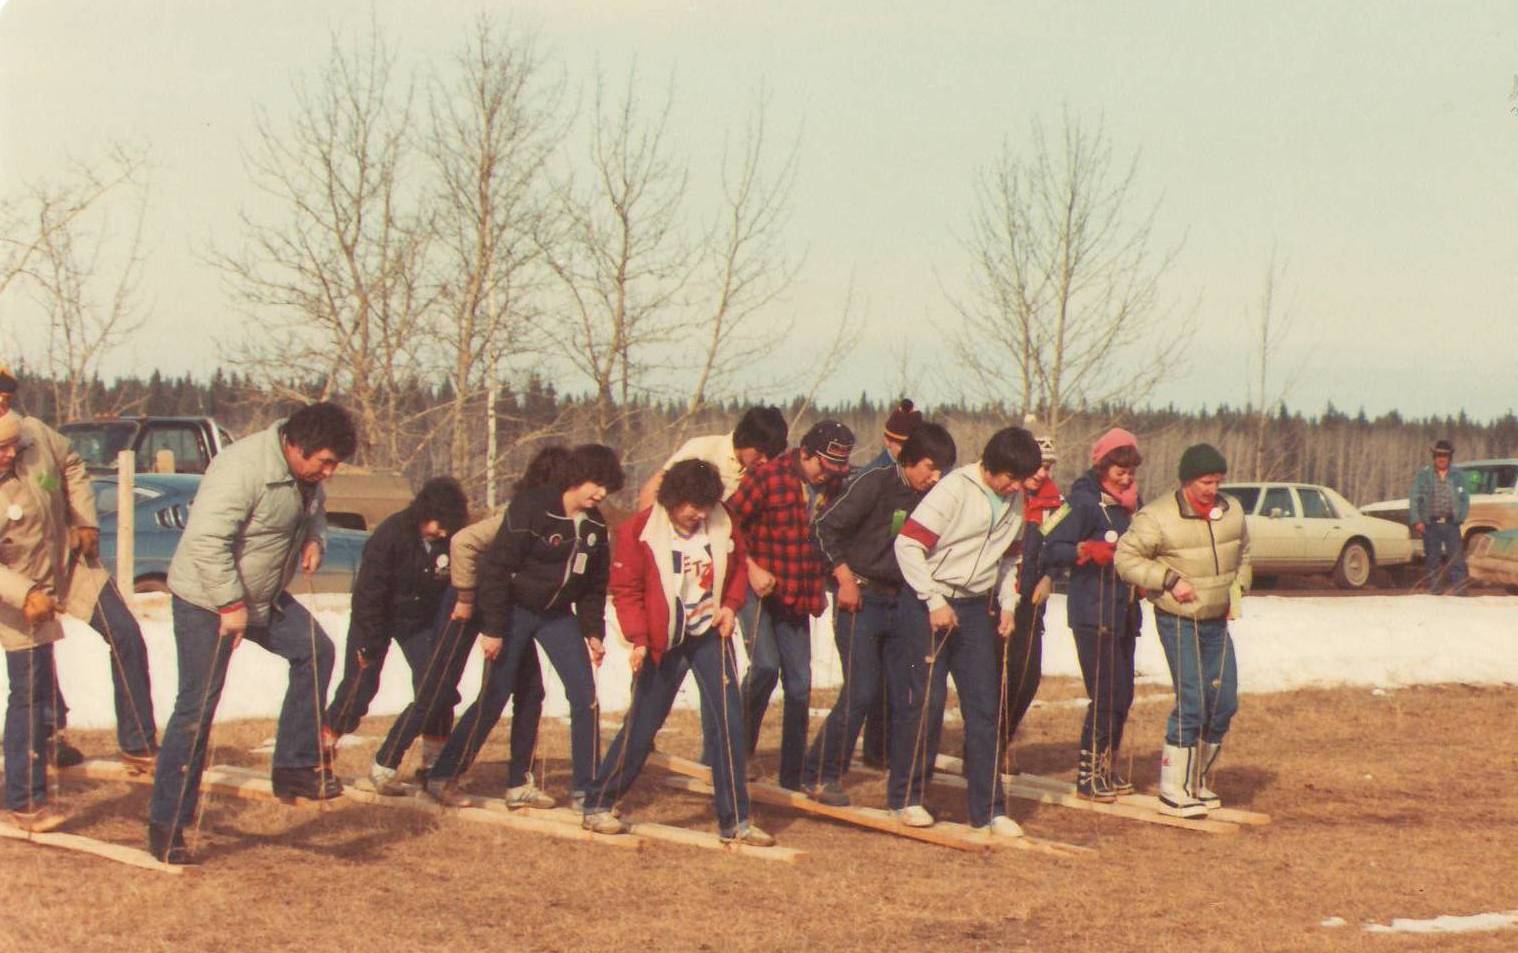 "Hew Chaw Days" (Winter Carnival) Competition 1983. 
Photo Credit: